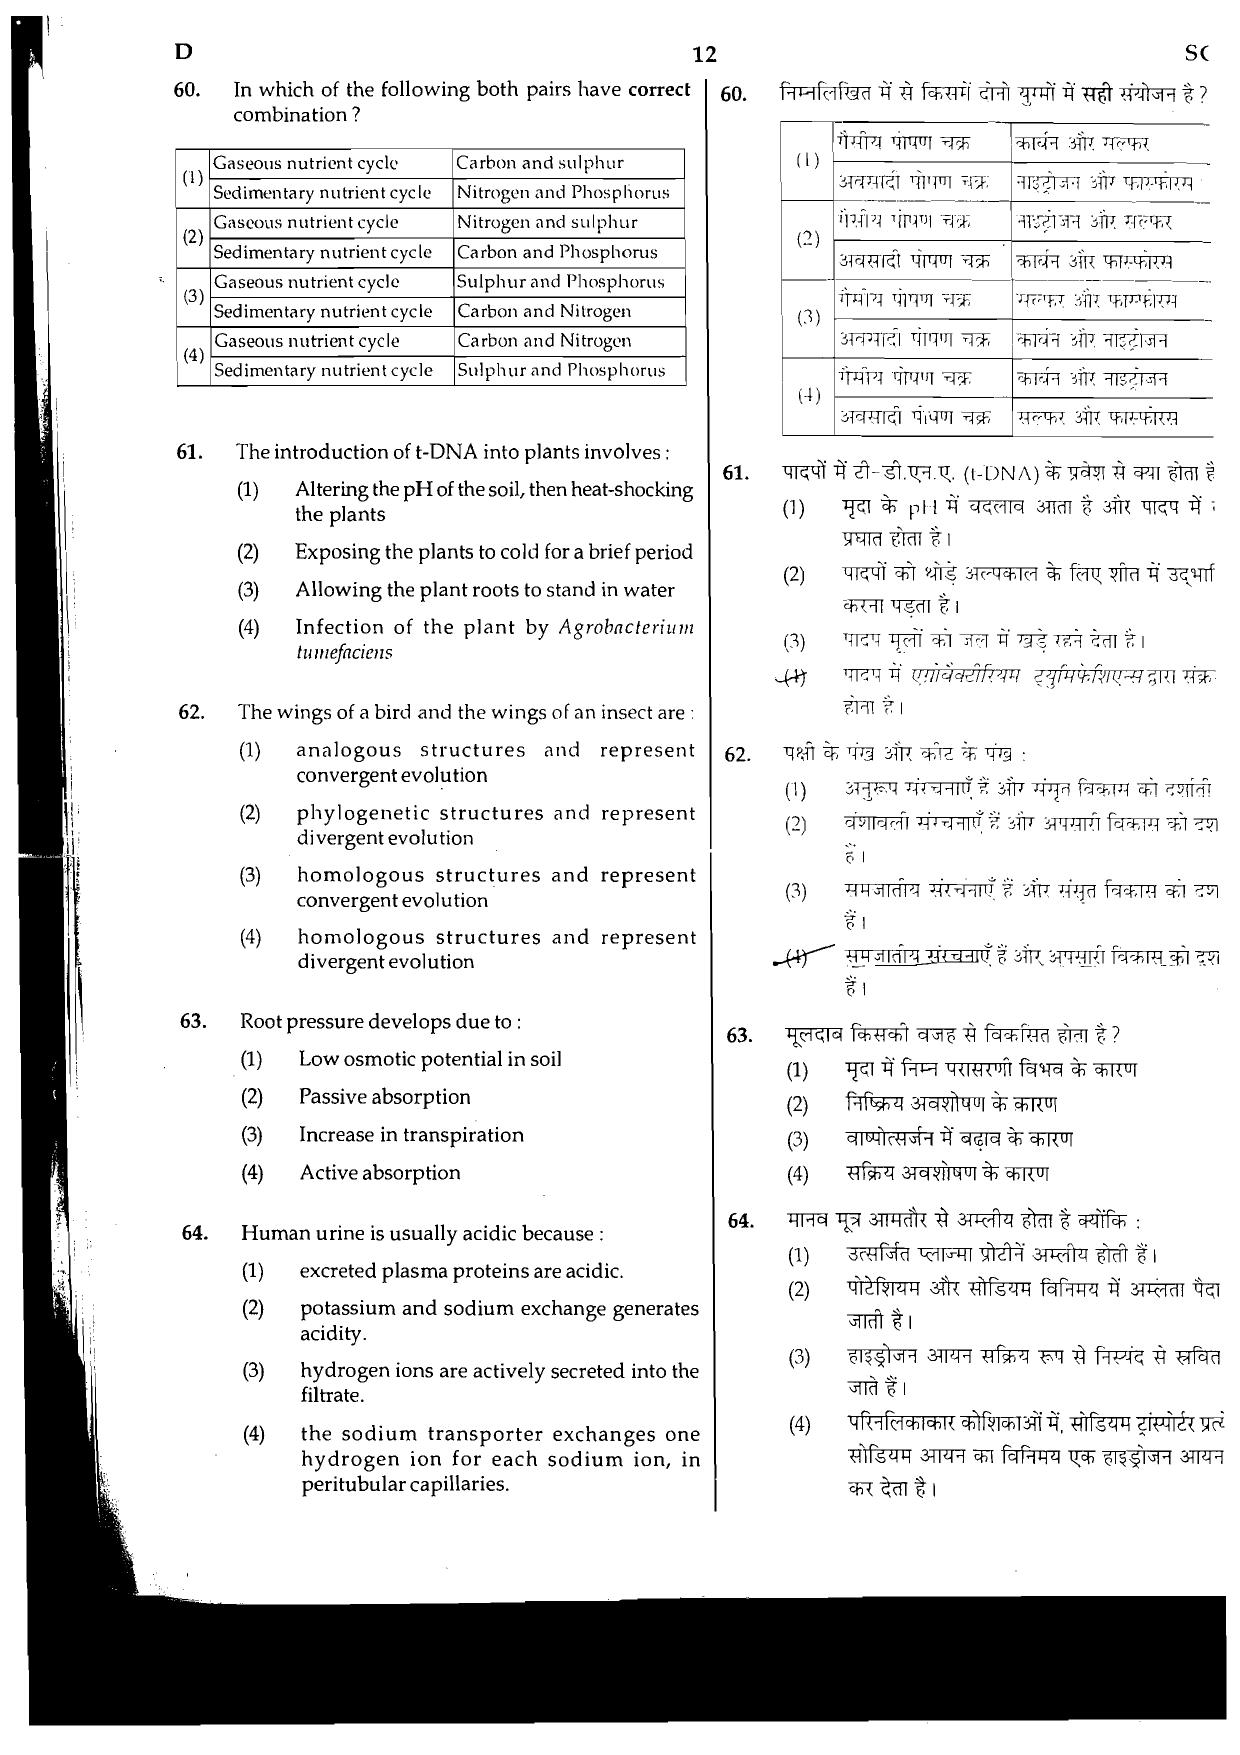 NEET Code D 2015 Question Paper - Page 12